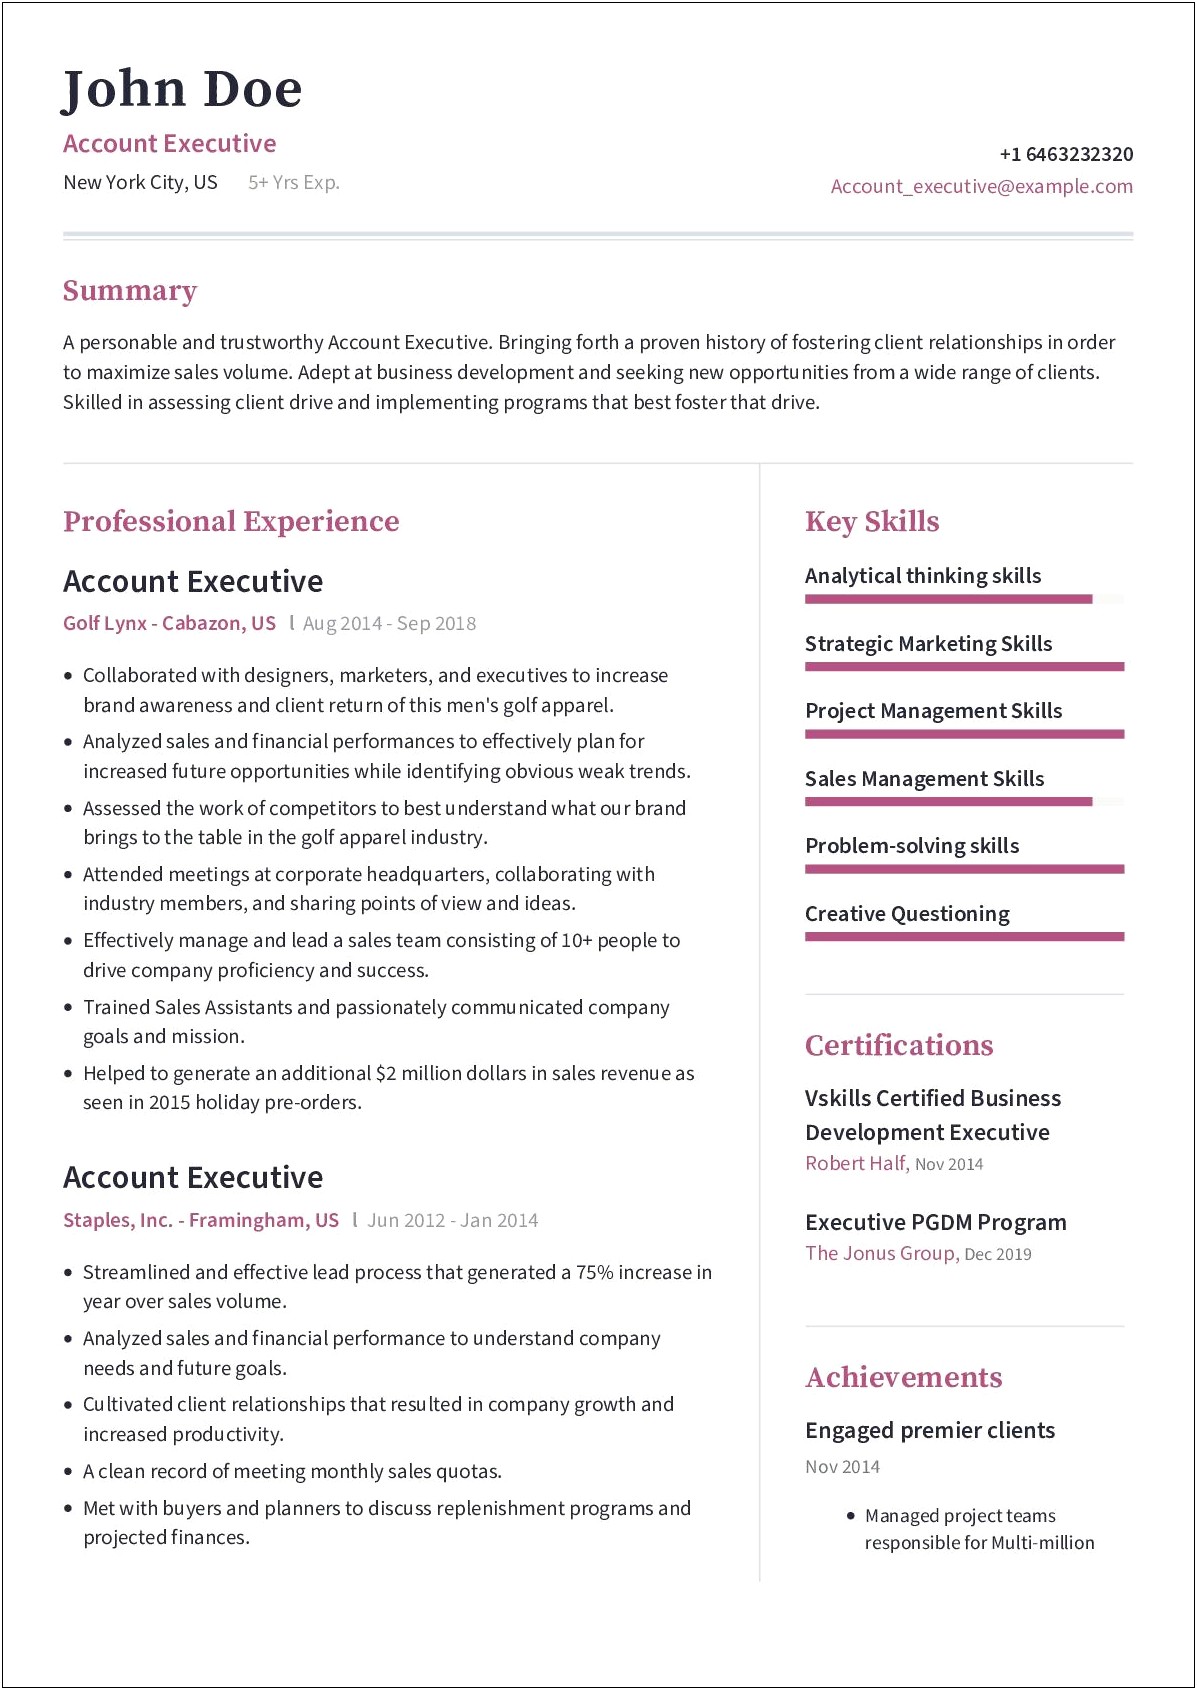 Sample New Business Account Executive Resume